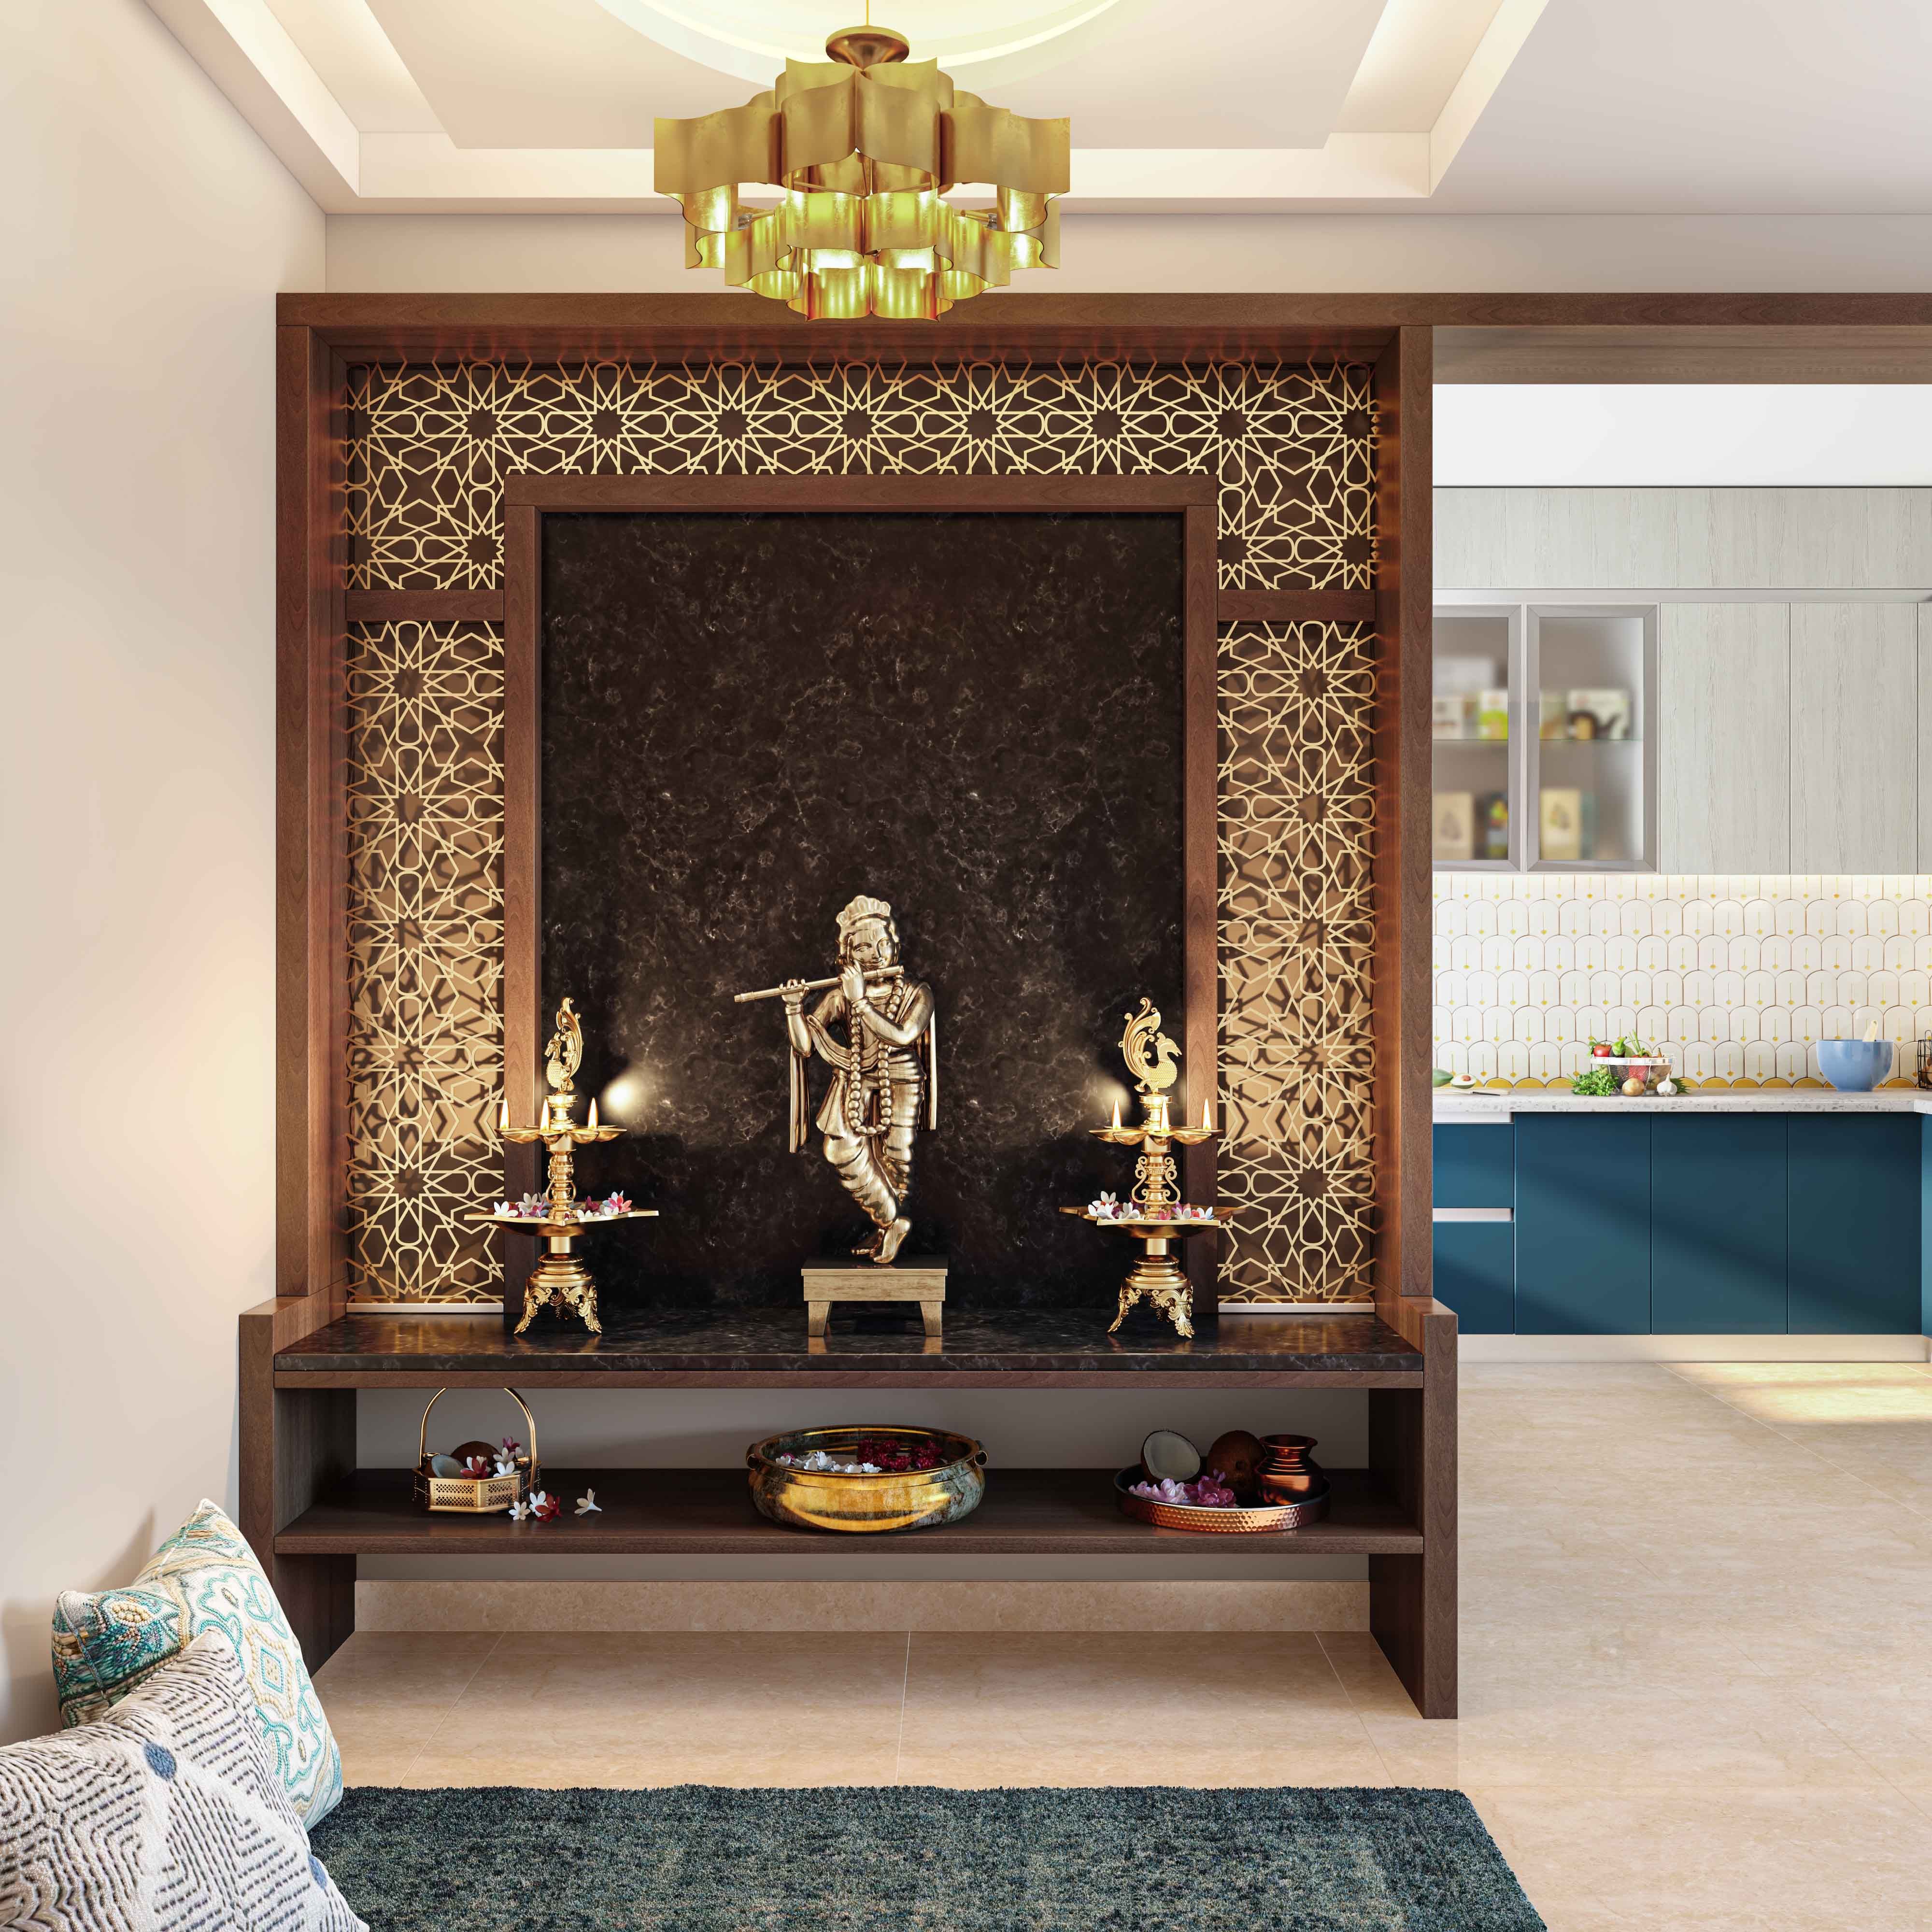 Indian Traditional Metal Lattice Wall Design In Brown And Gold